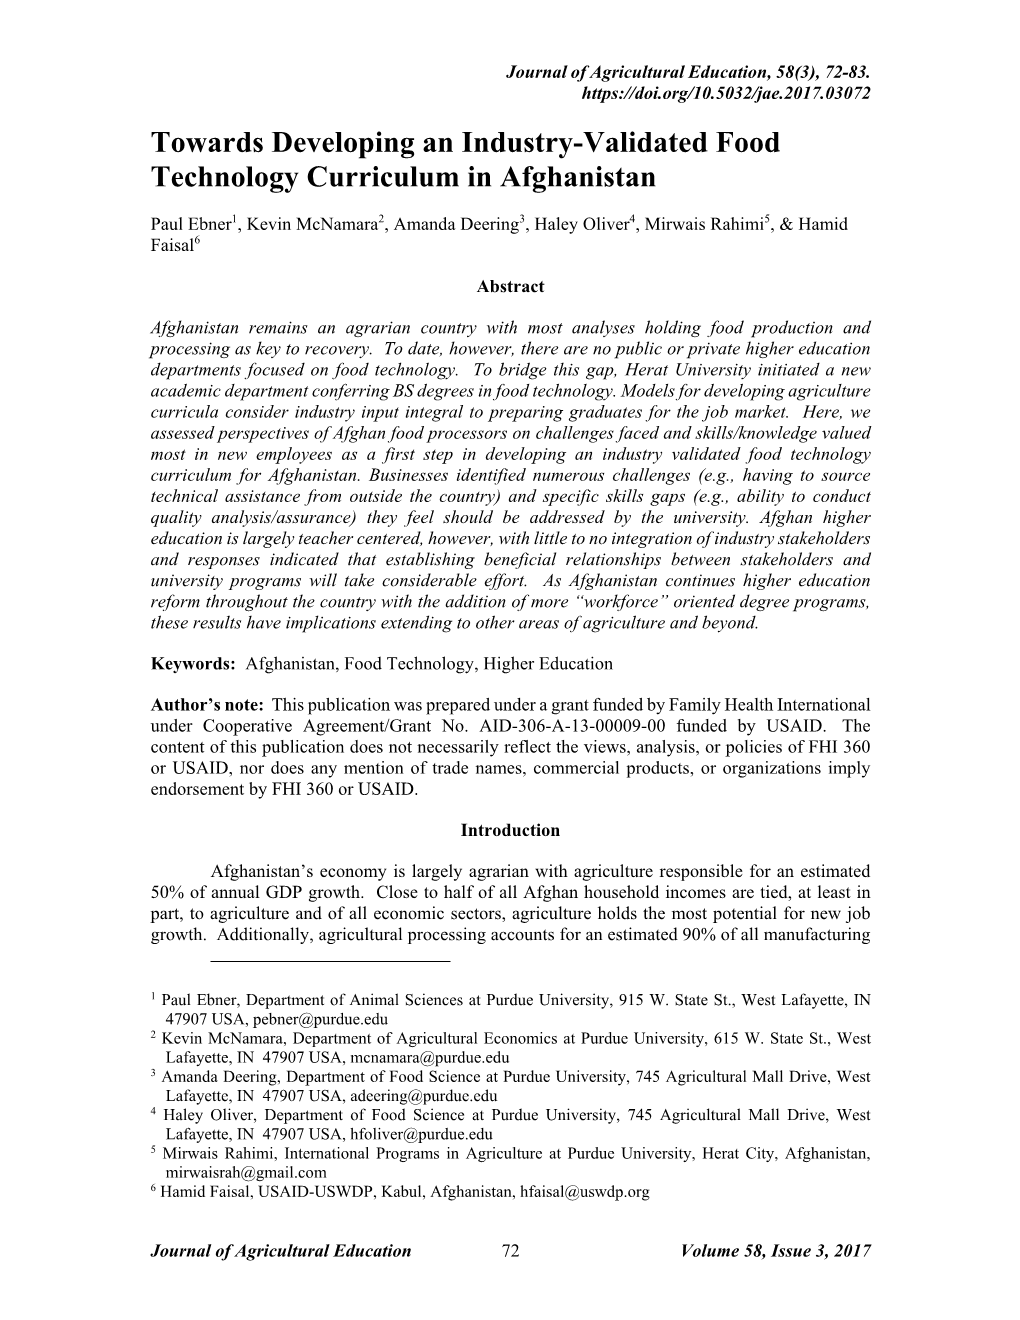 Towards Developing an Industry-Validated Food Technology Curriculum in Afghanistan